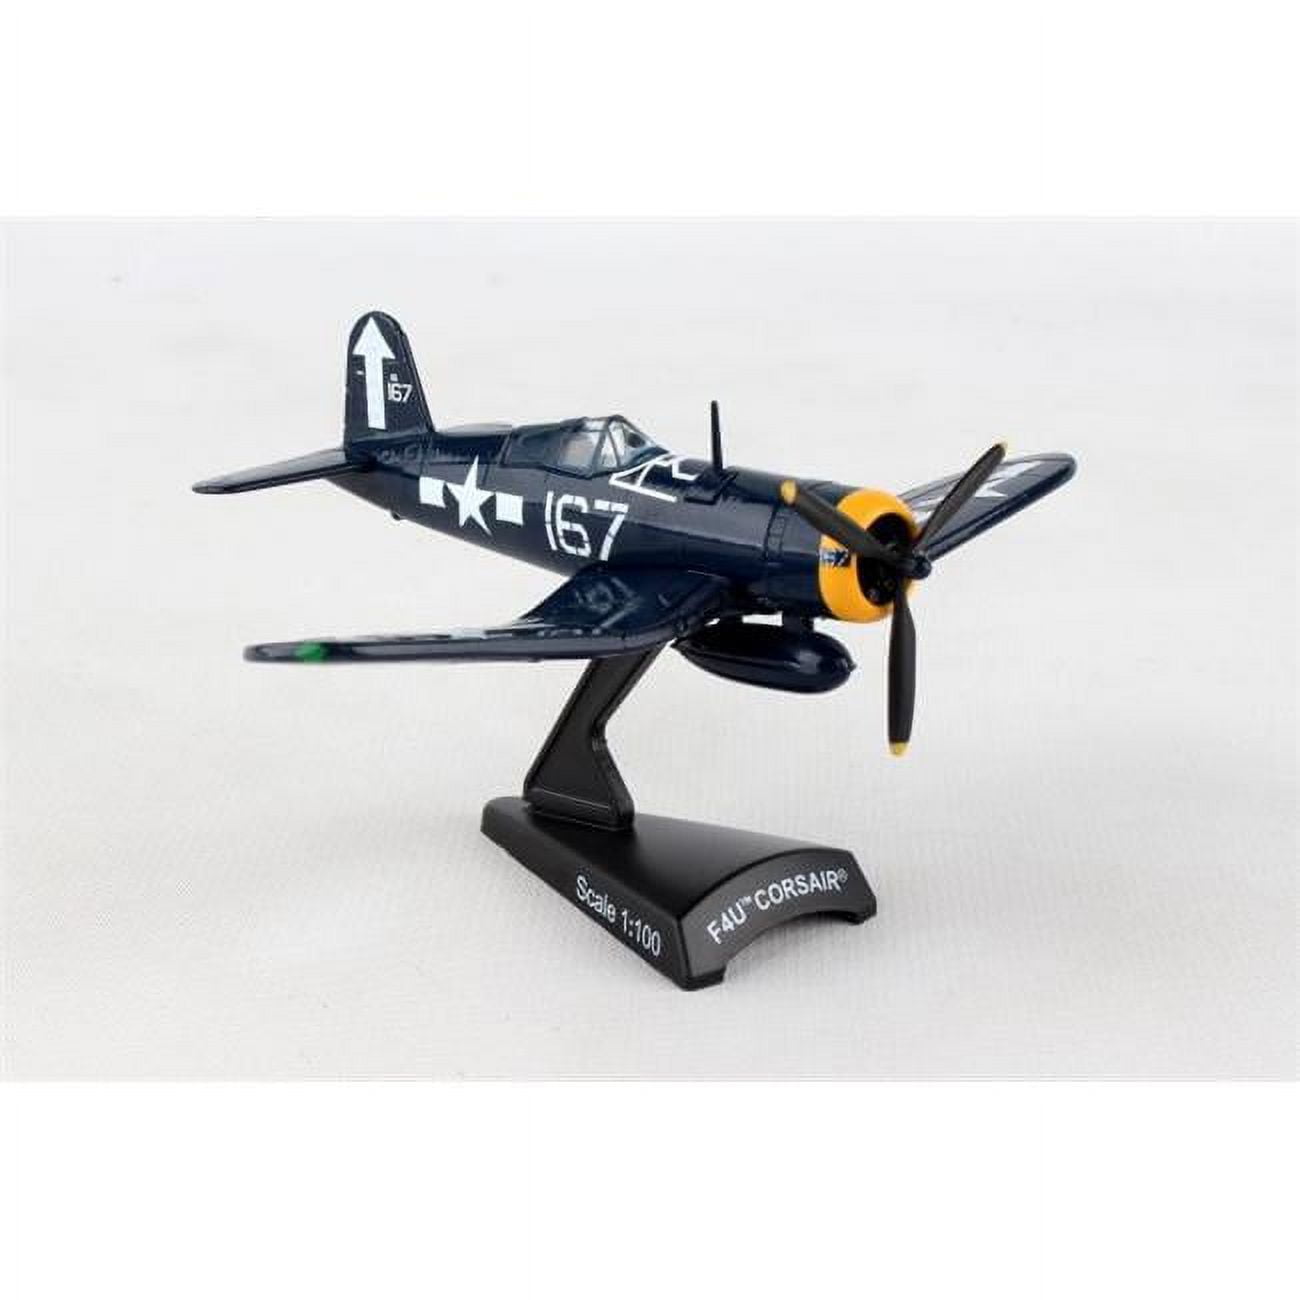 Picture of Postage Stamp Planes PS5356-4 F4U Corsair 1-100 No. 167 USN Diecast Airplane Model